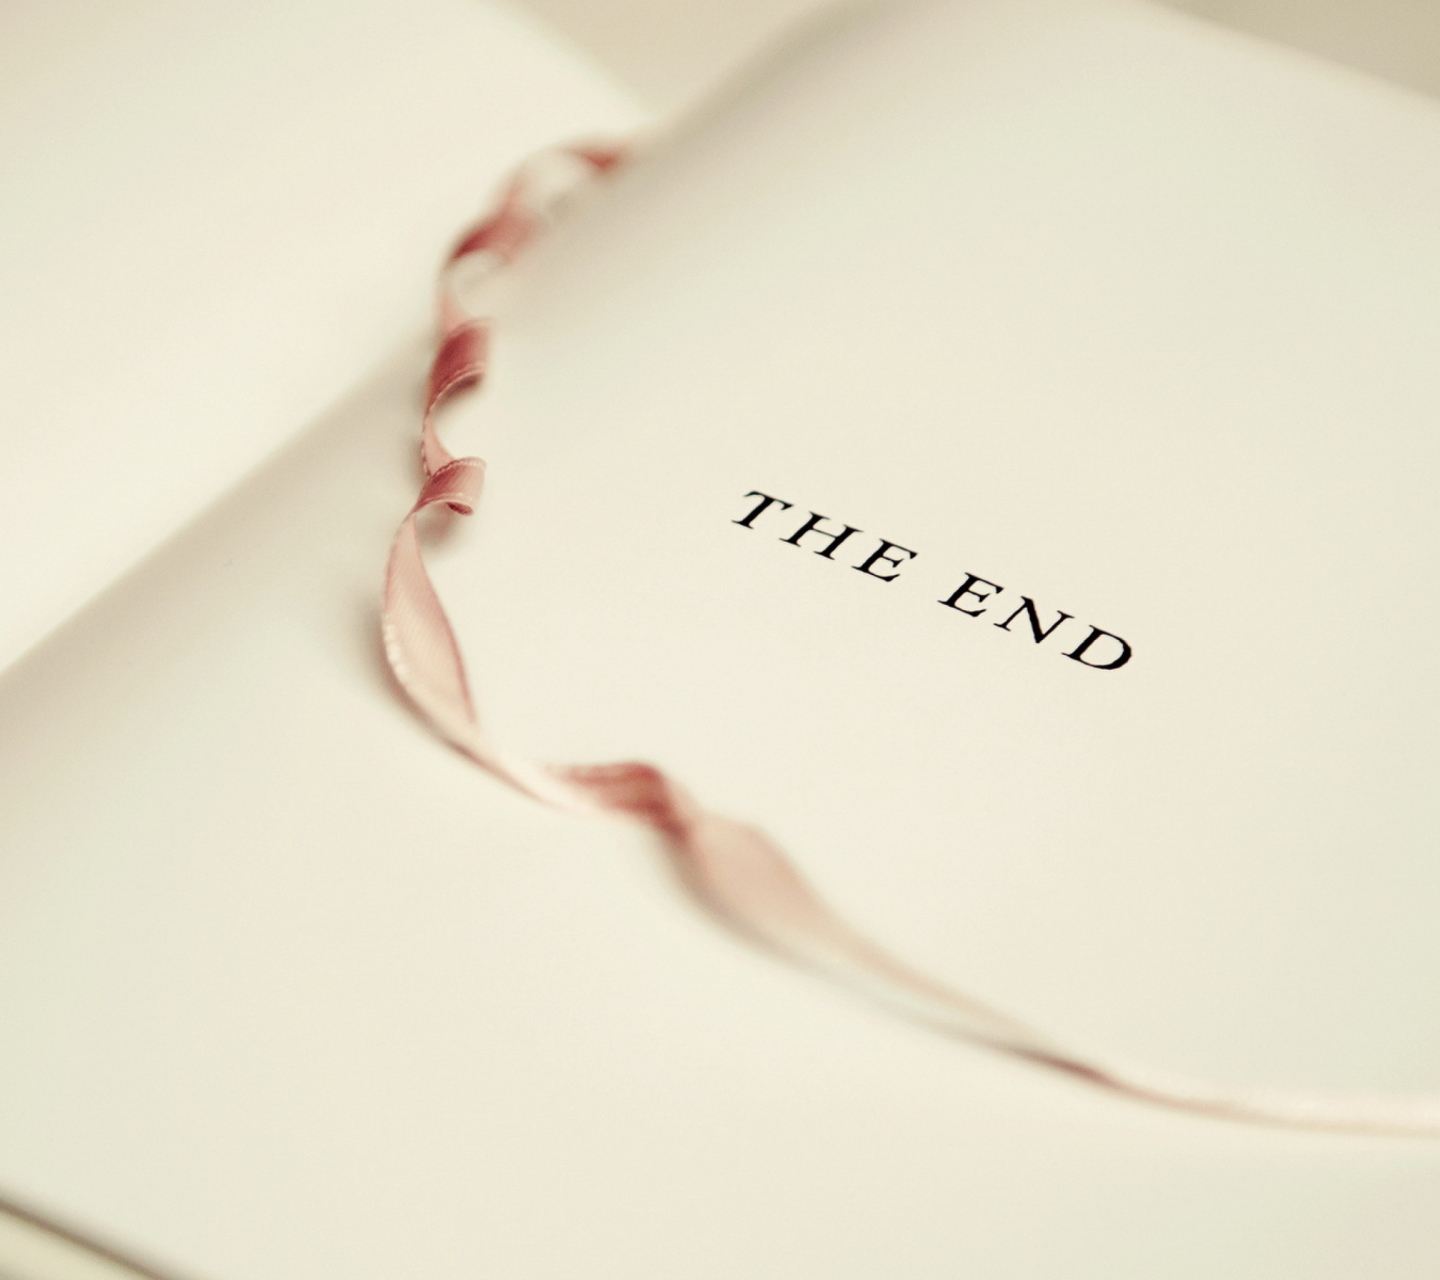 The End Of Book wallpaper 1440x1280